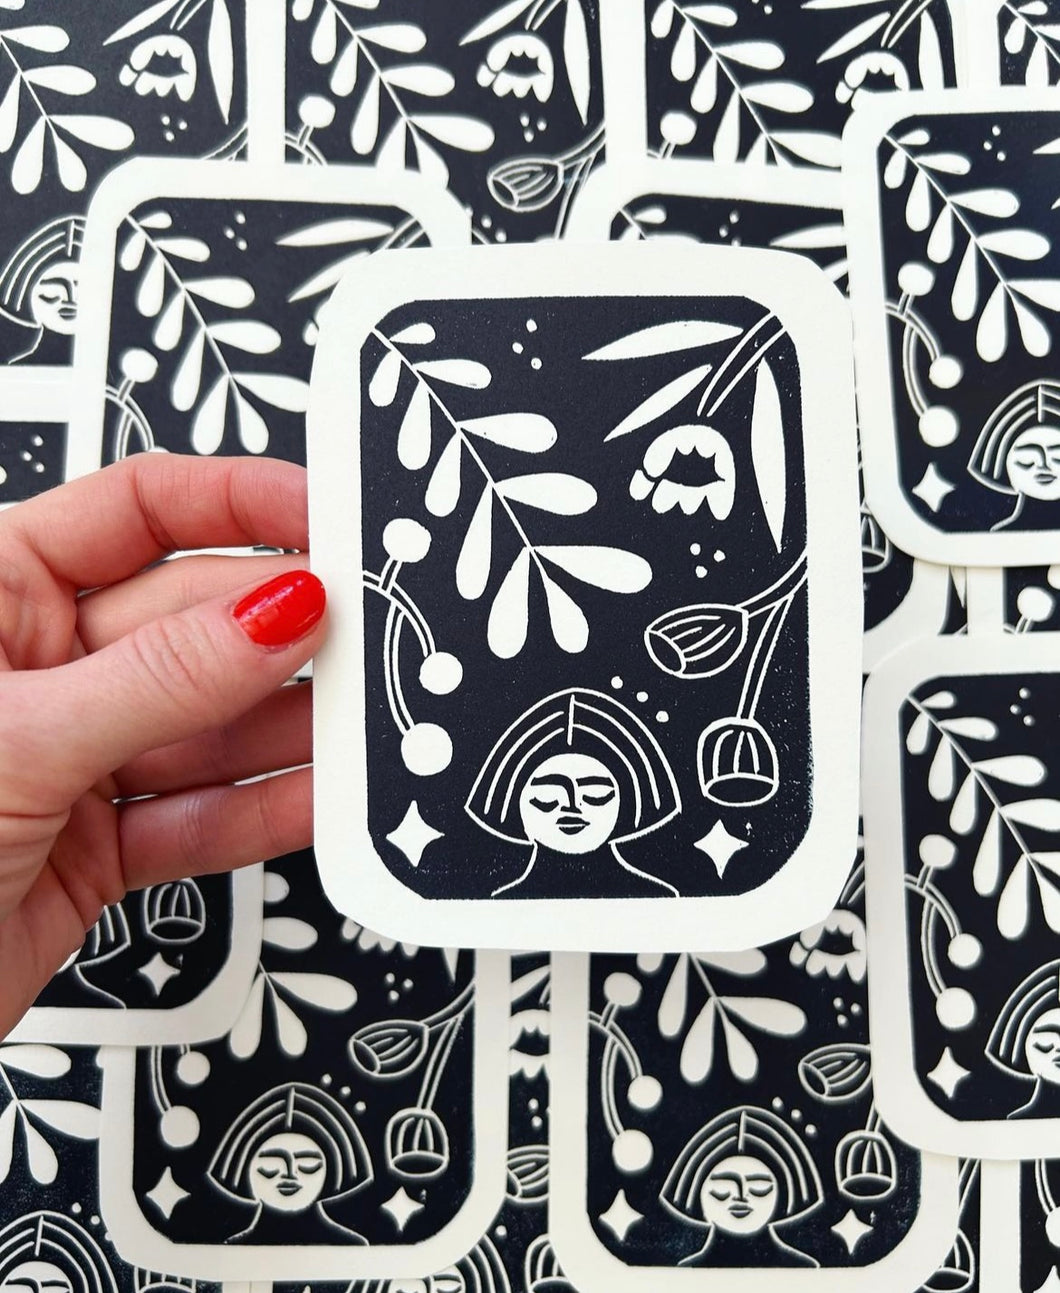 Intro to Blockprinting: Spring Edition! At the Toolbox Collective